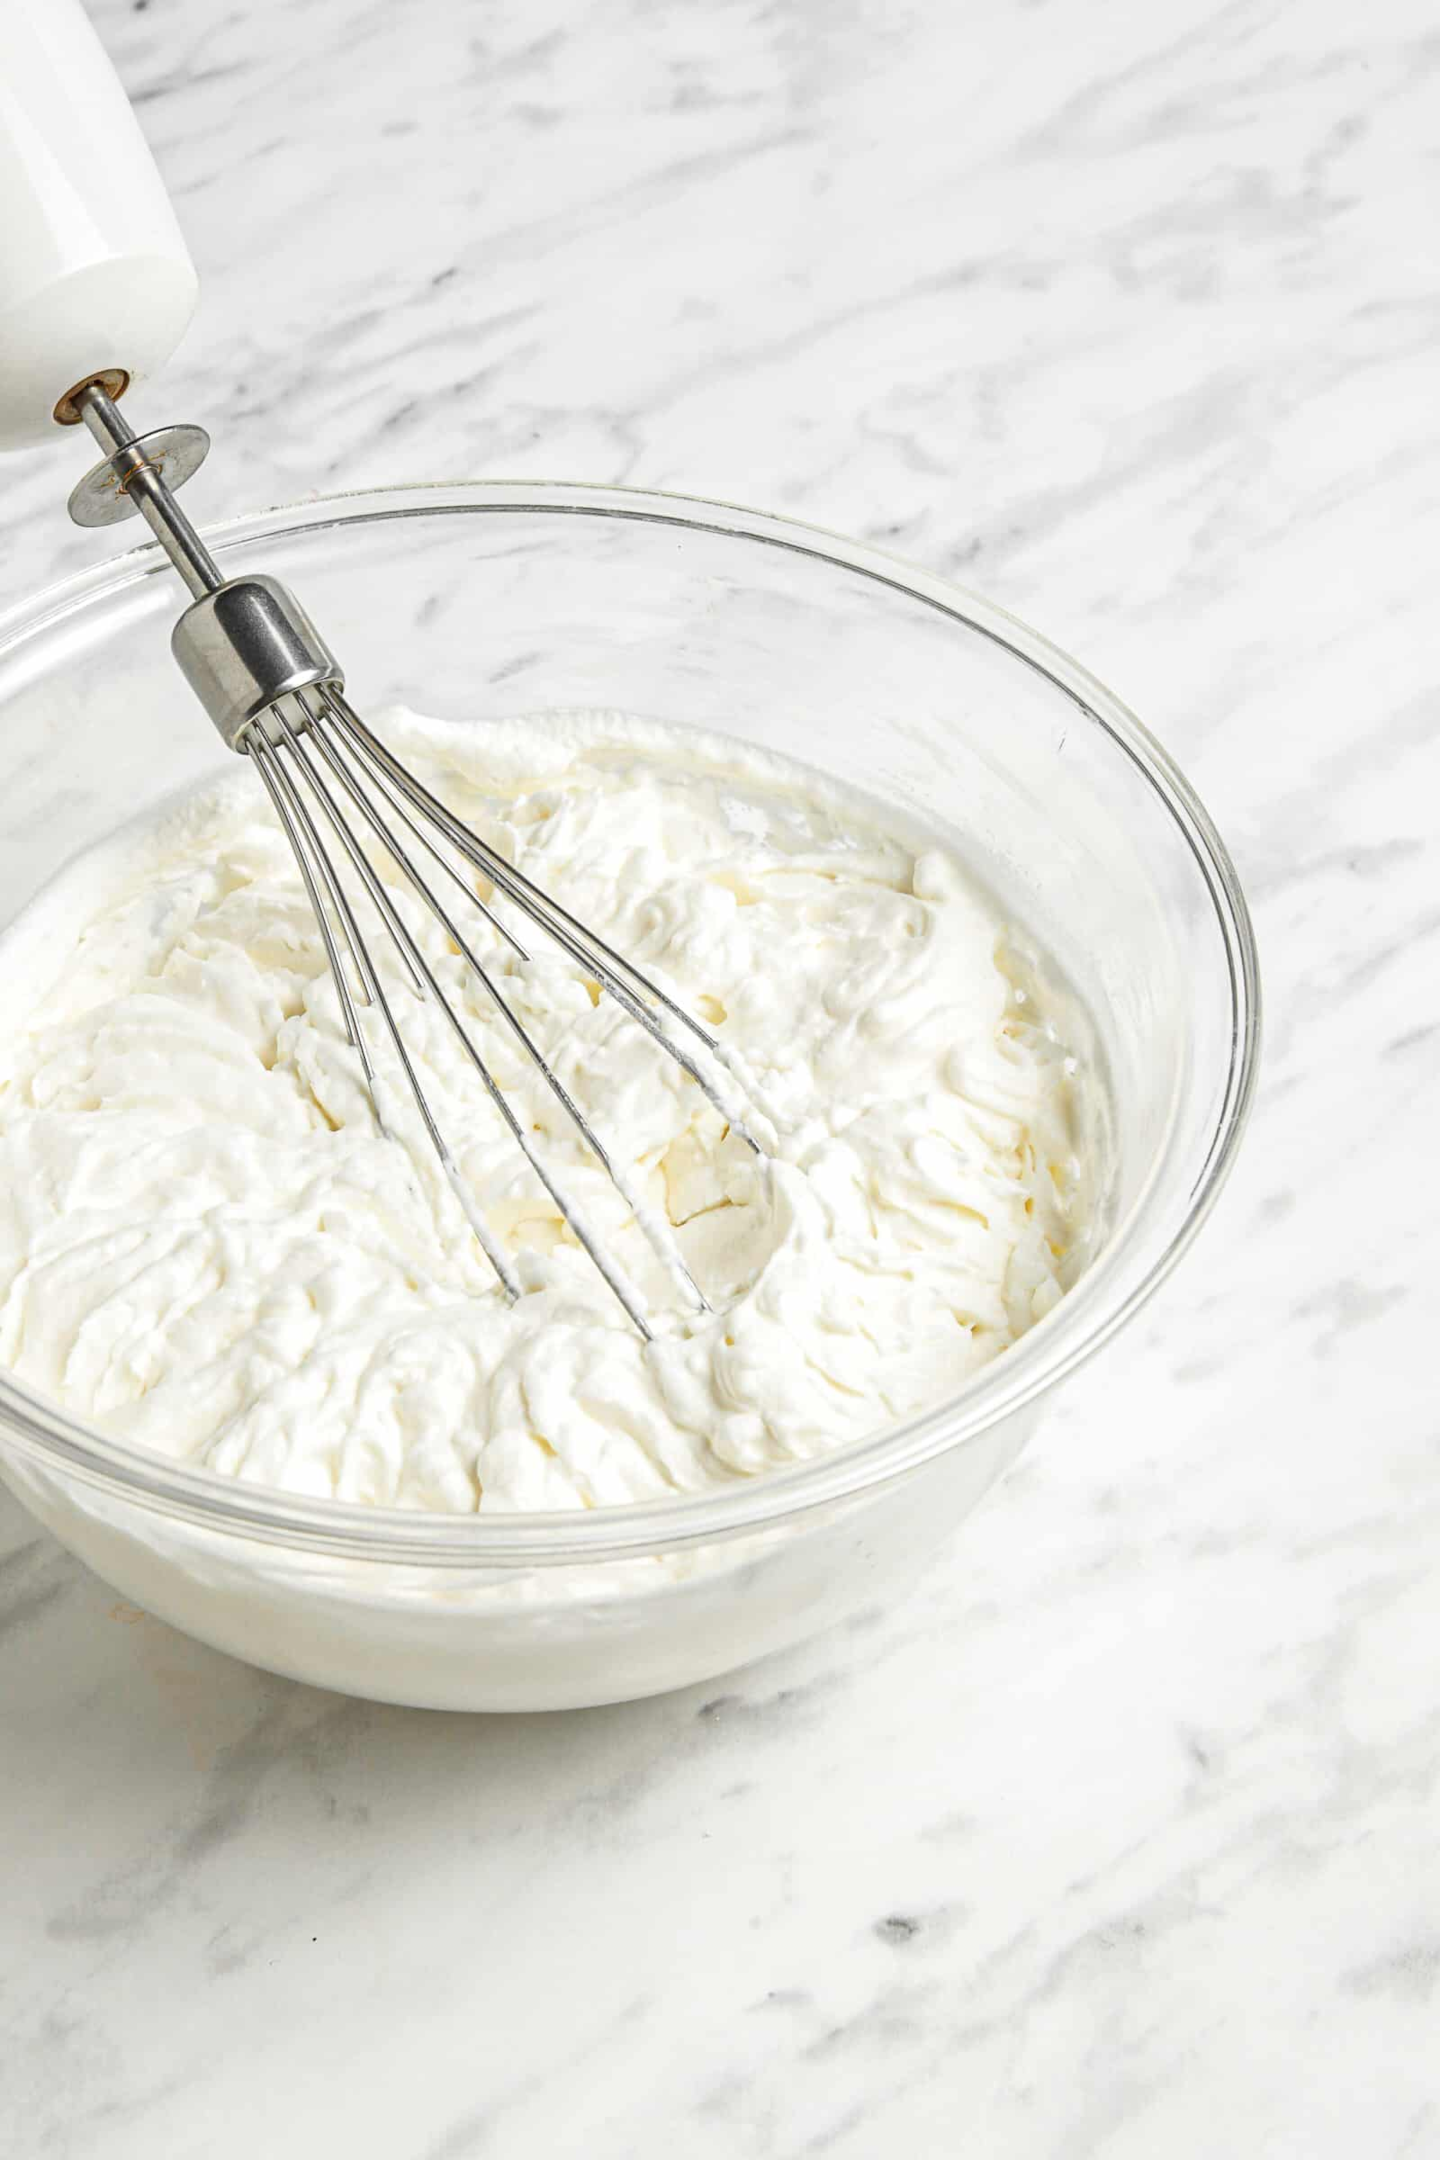 electric whisk in a bowl of whipped cream